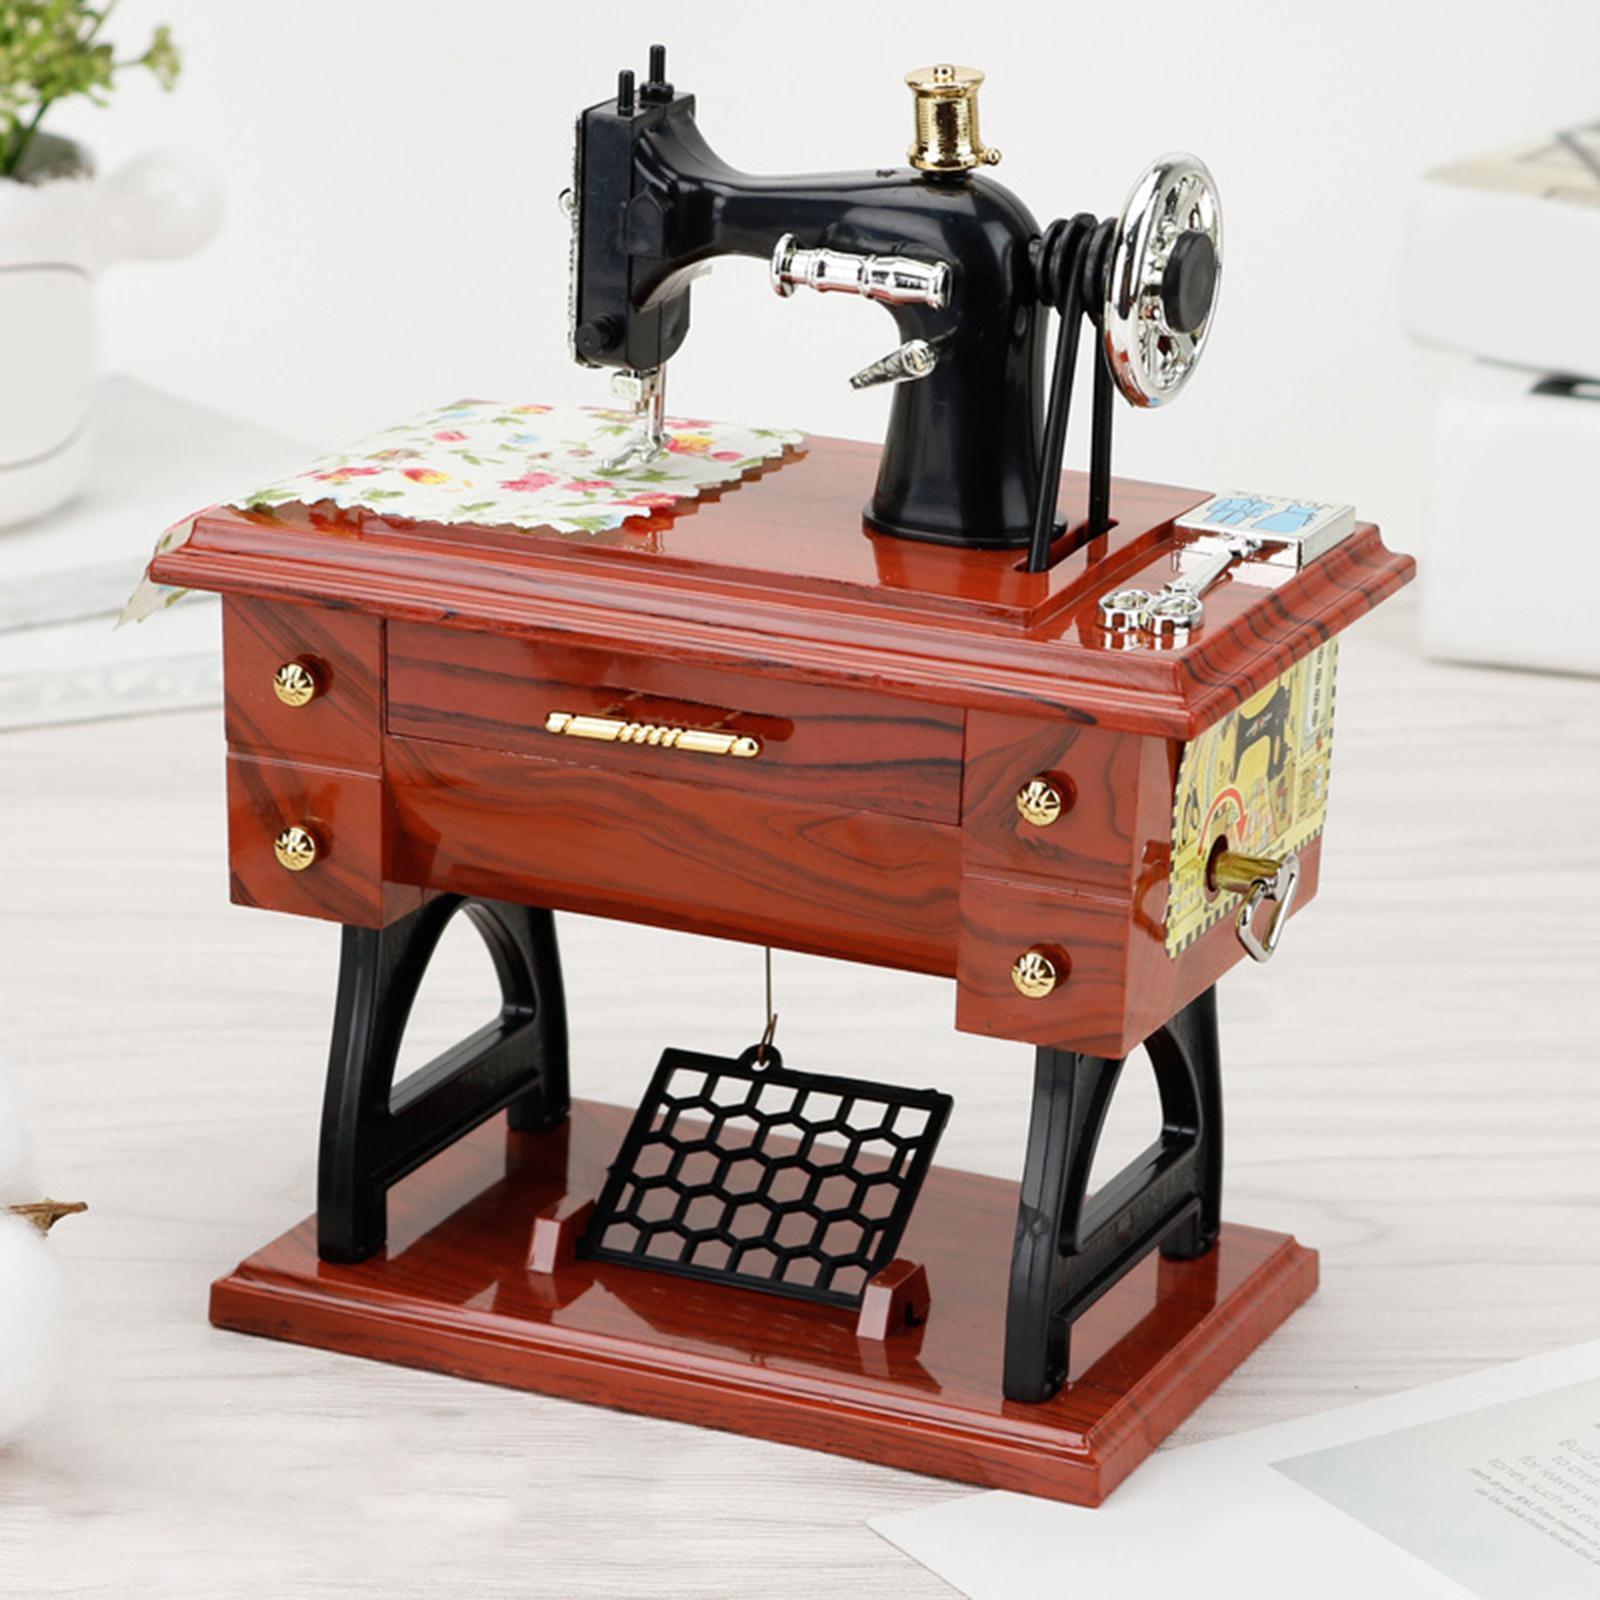 Sewing Machine Music Box Mechanical Music Box Table Decor for Desk Ornament Musical Gifts